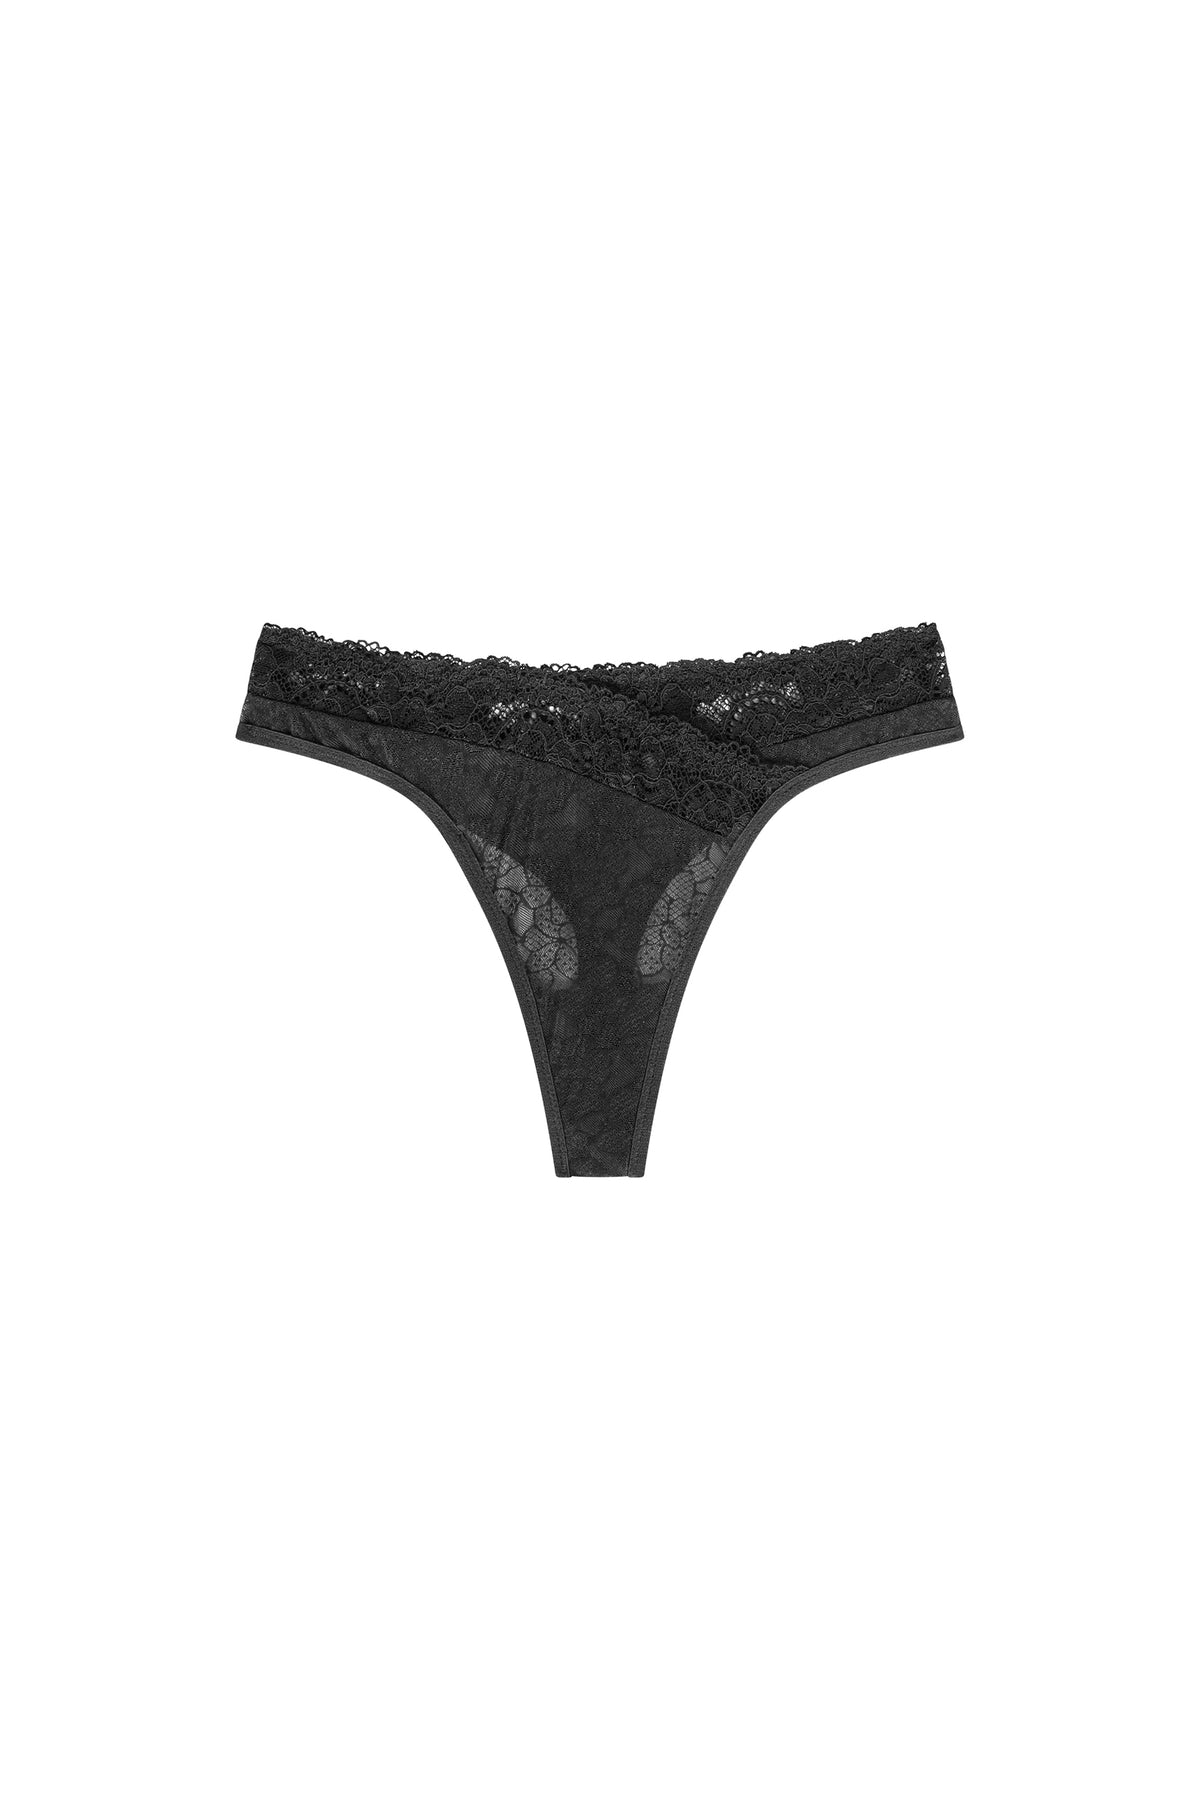 Black lace sustainable thong